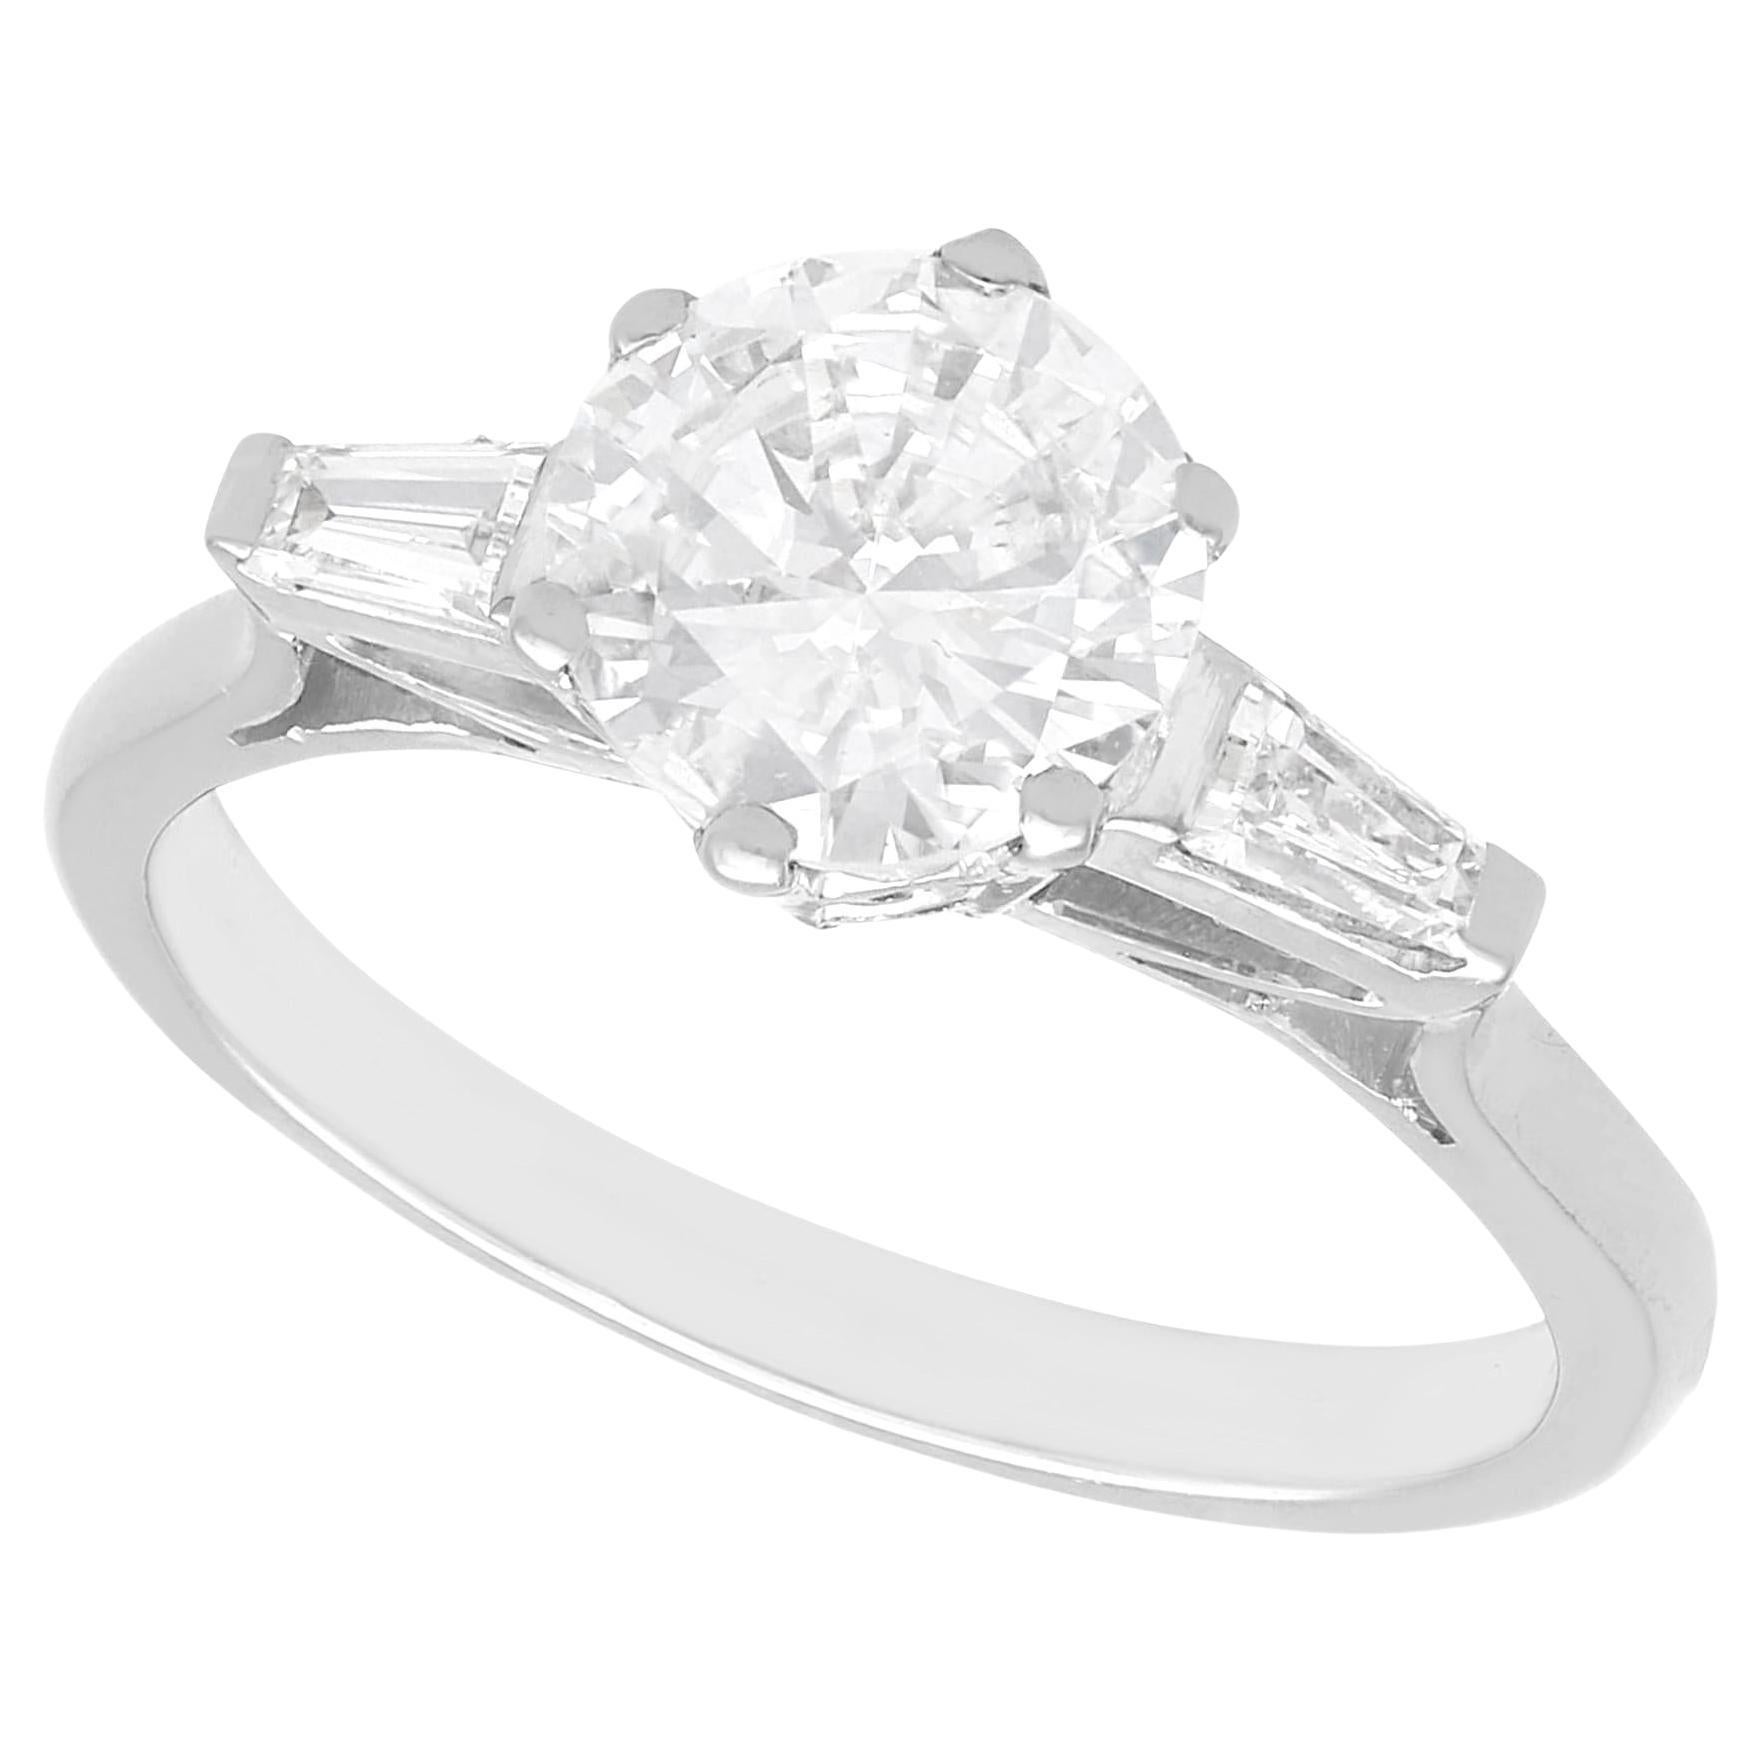 Antique 1.62 Carat Diamond and 18k White Gold Solitaire Ring, circa 1935 For Sale